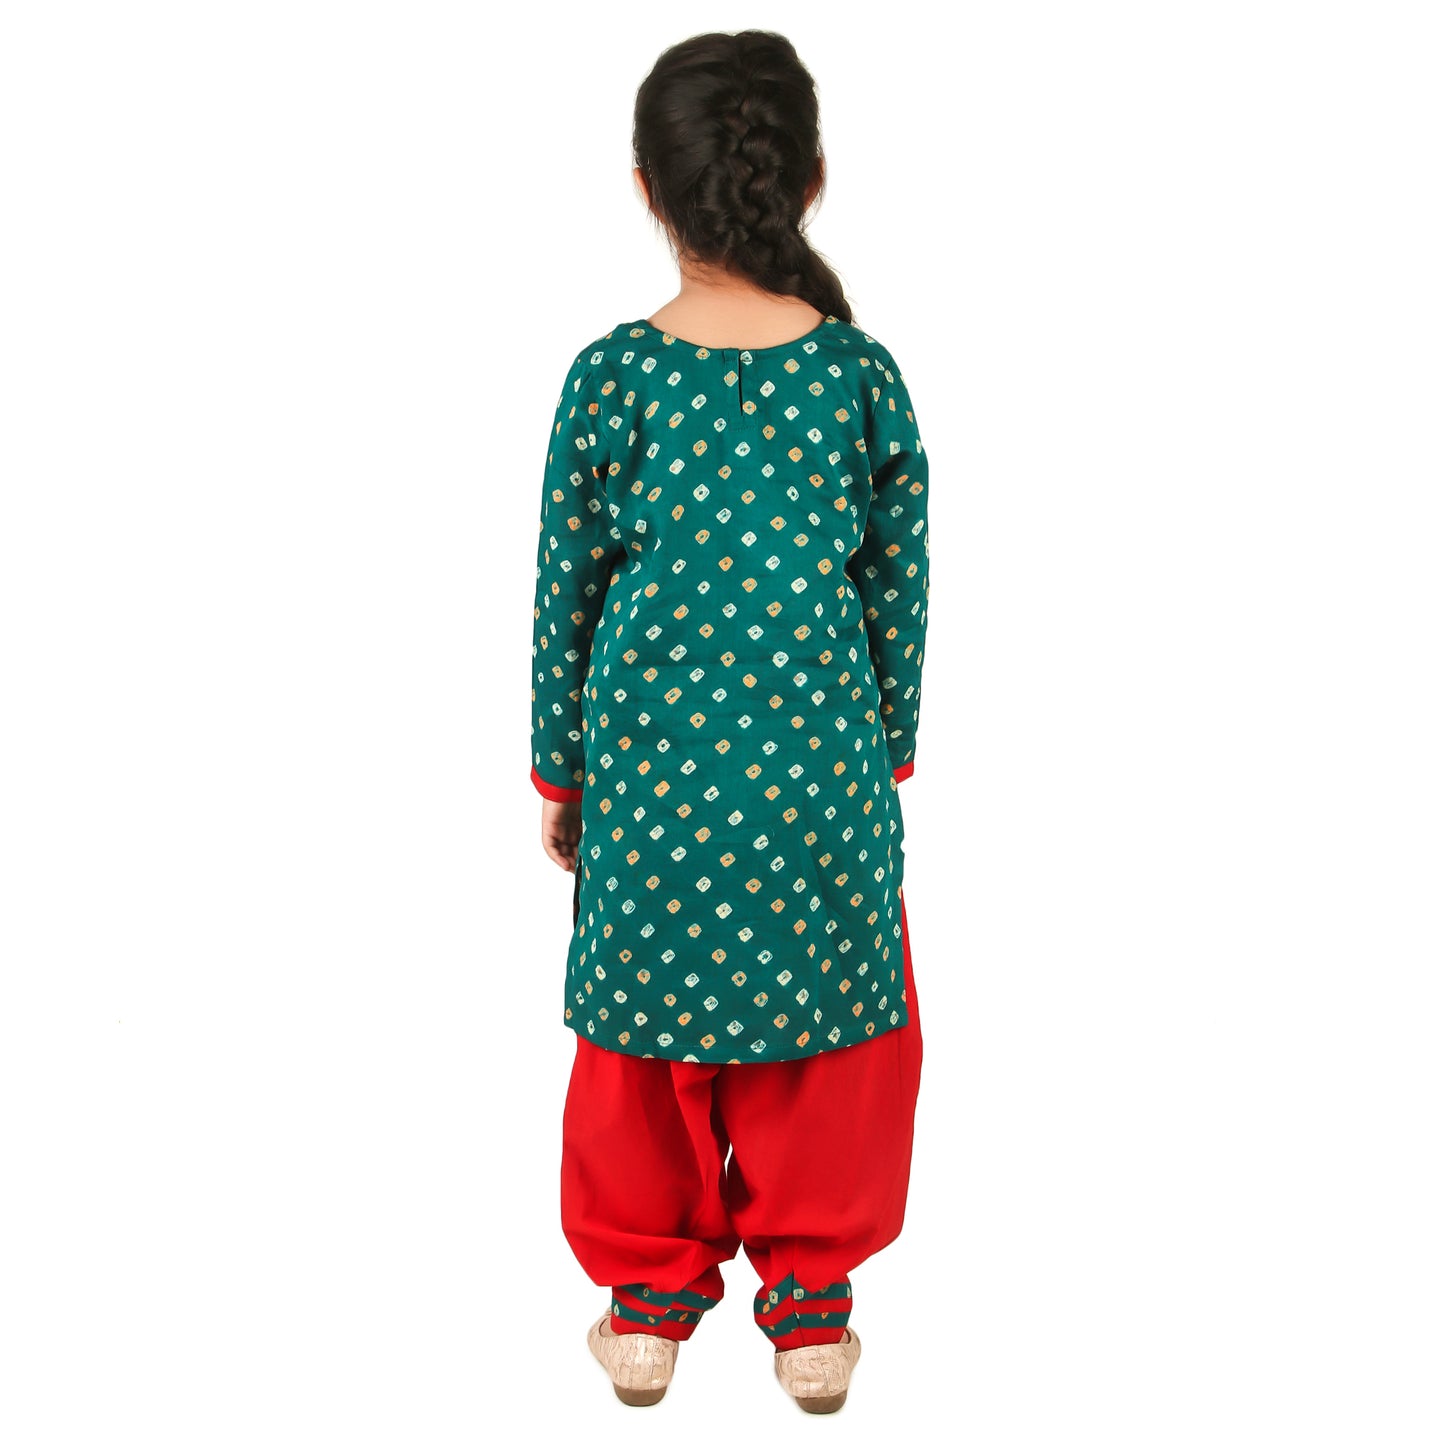 Green Salwar Suit for Girls, Ages 6 Months to 16 Years, Cotton, Bandhani Tie-Dye